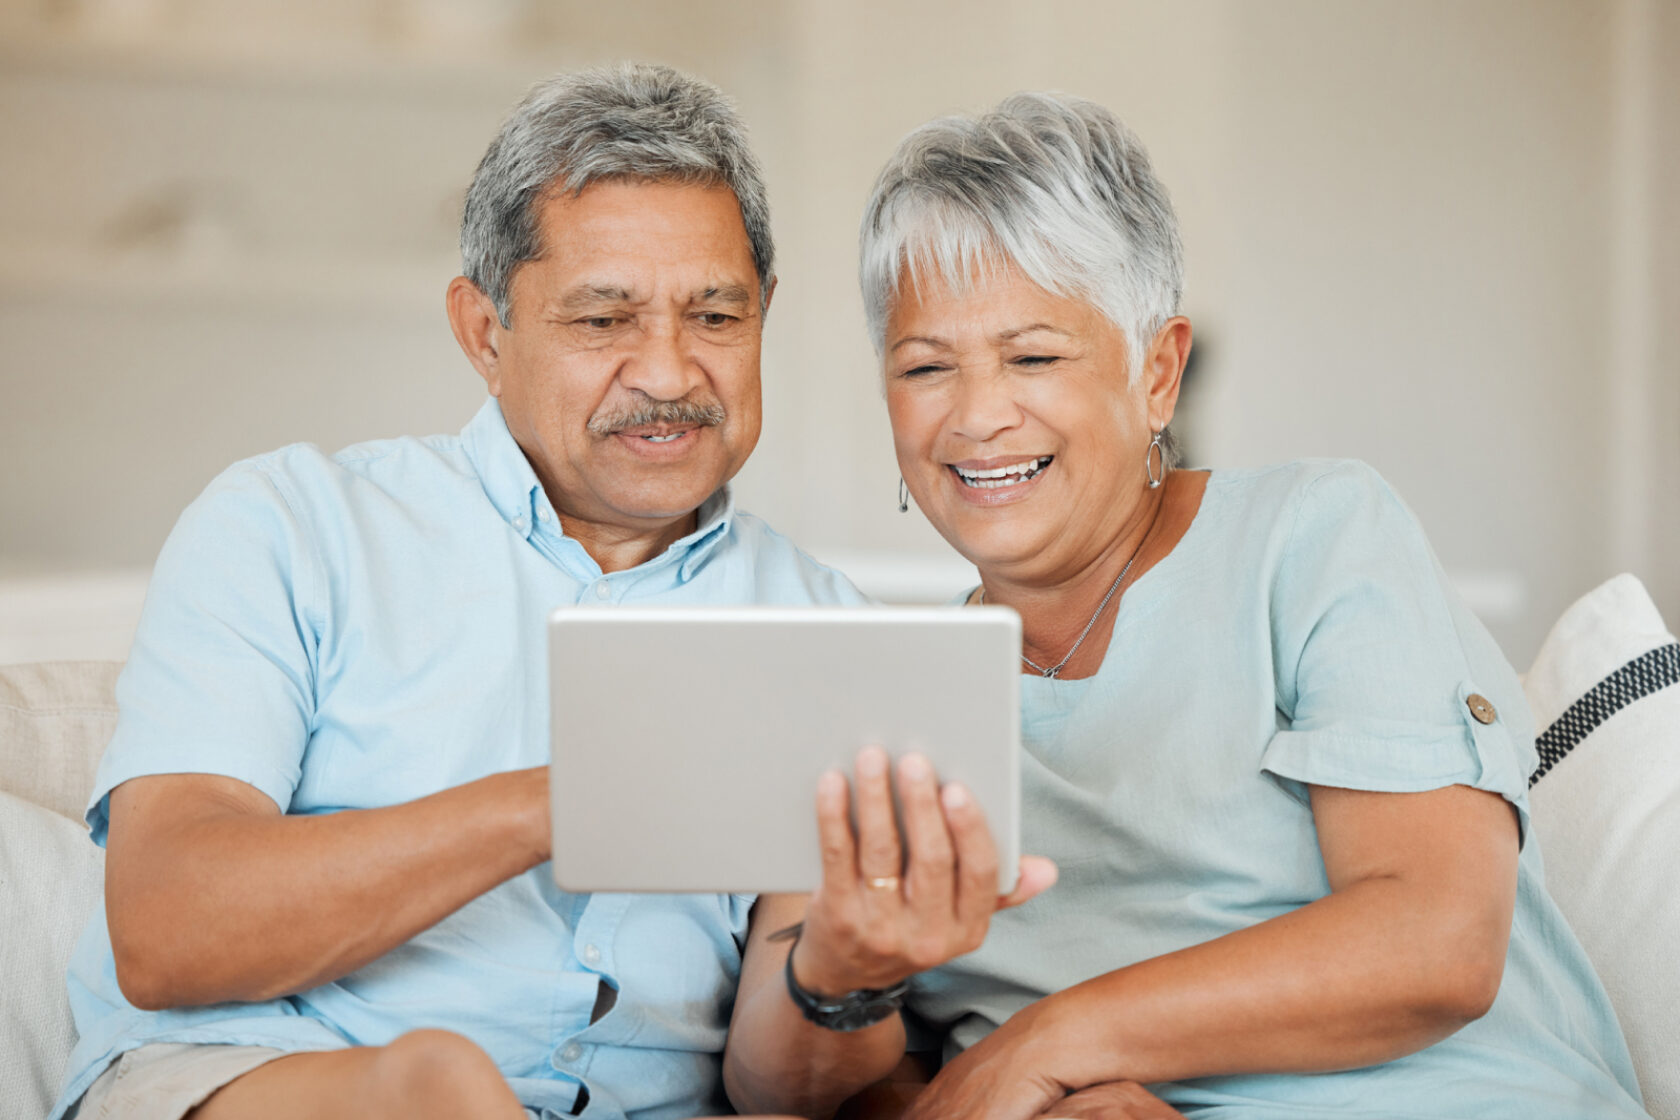 A husband and wife review information on a tablet.